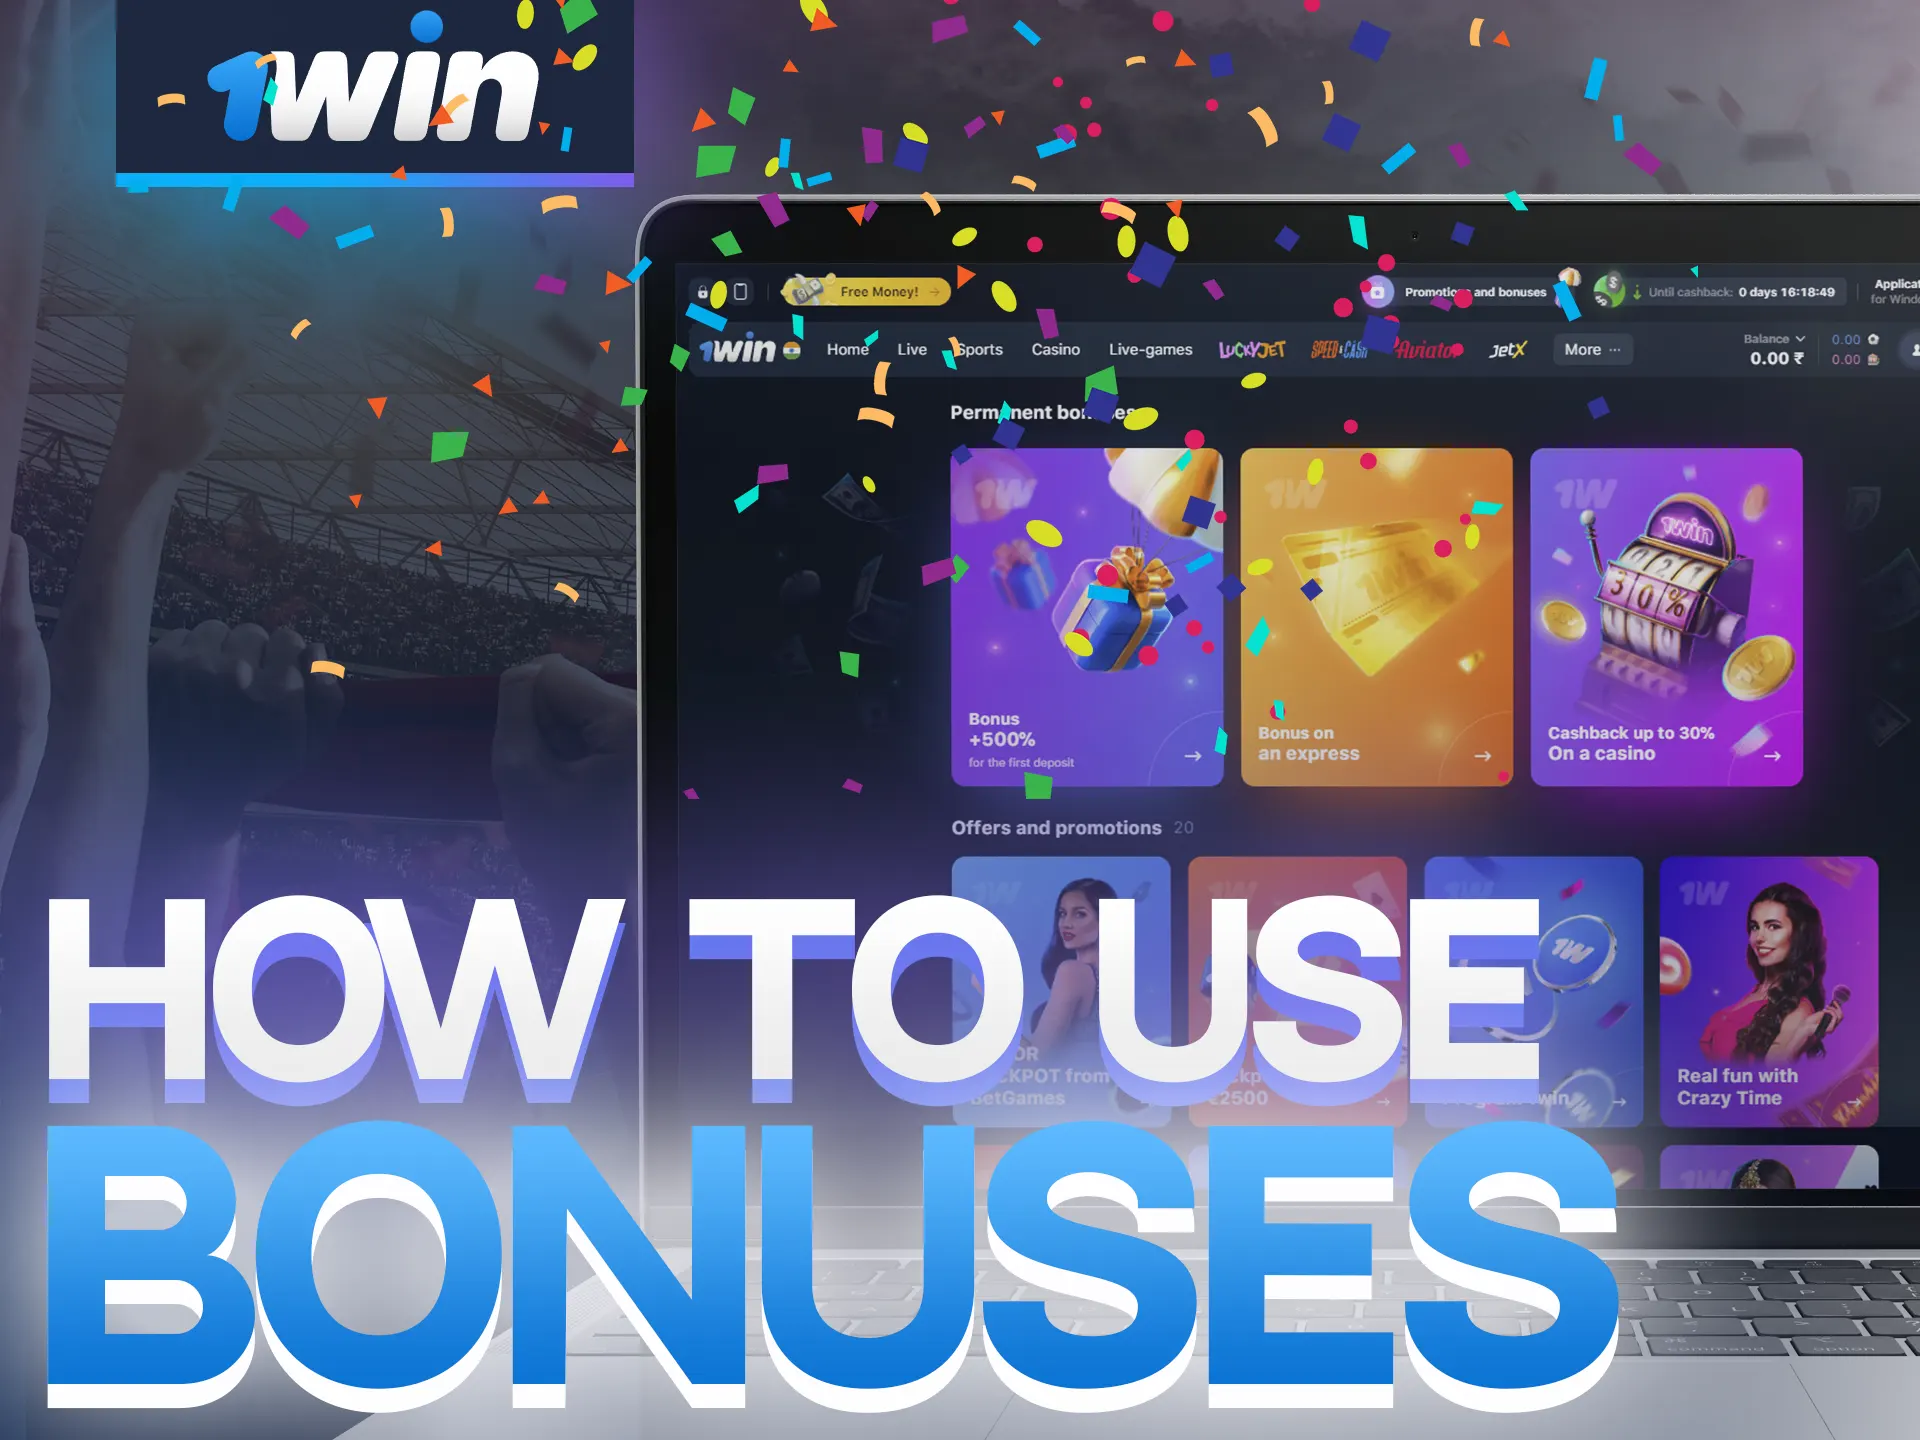 Learn how to use 1Win bonuses with these instructions.